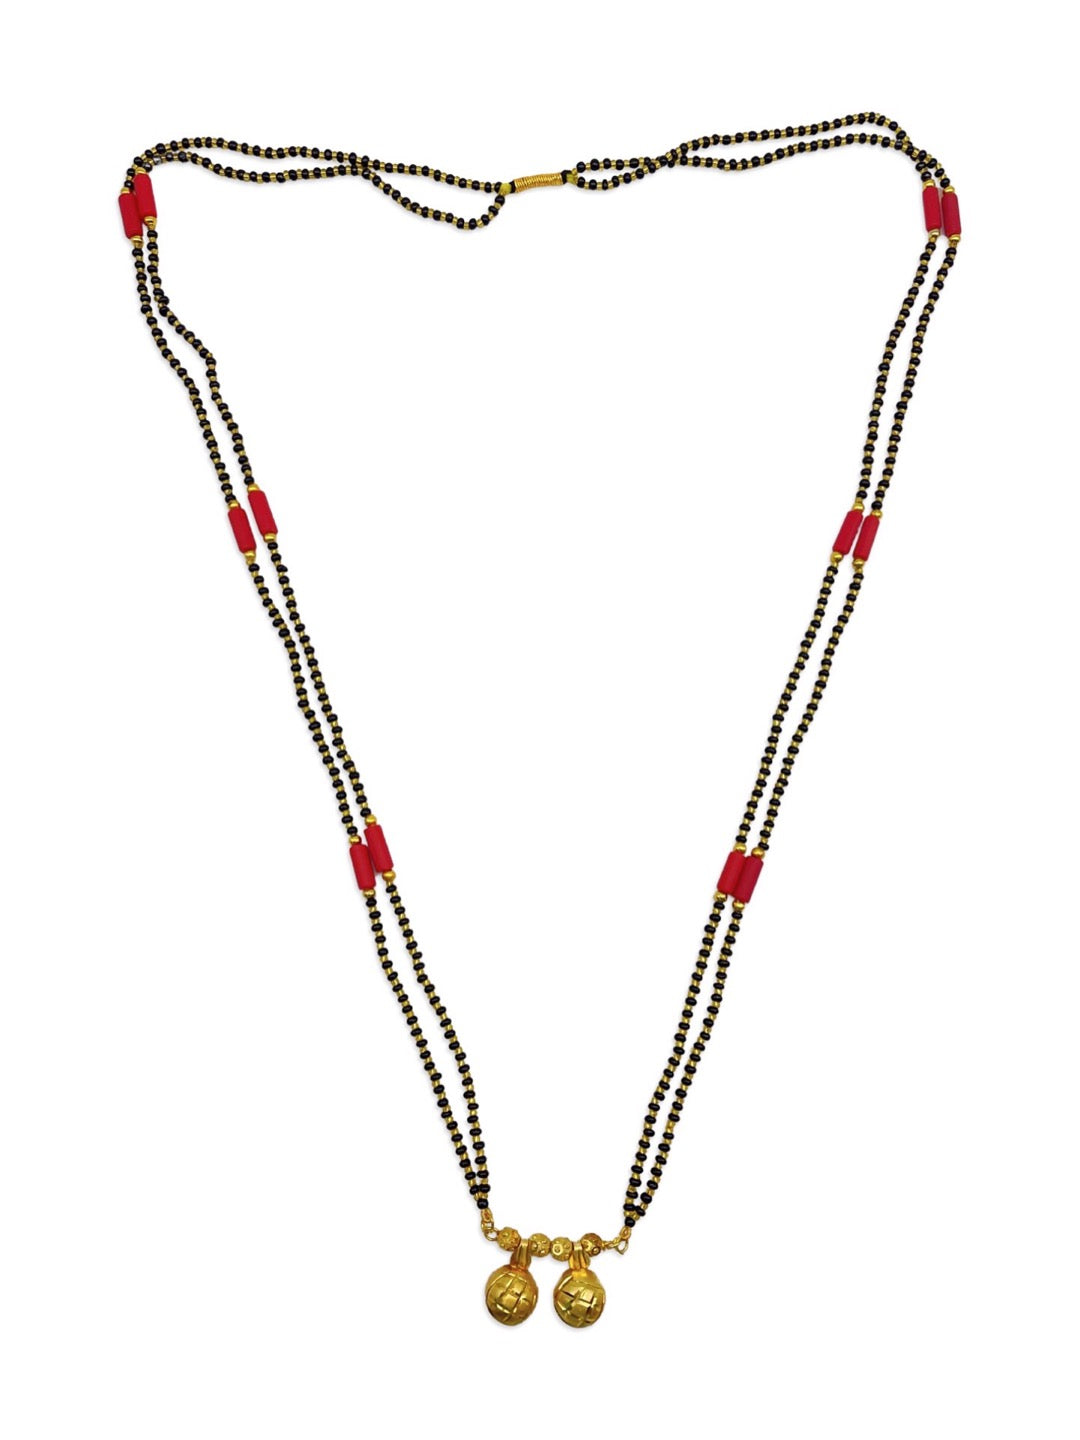 Long Mangalsutra Designs Gold Plated Latest Vati Pendant Double Layer Mangalsutra